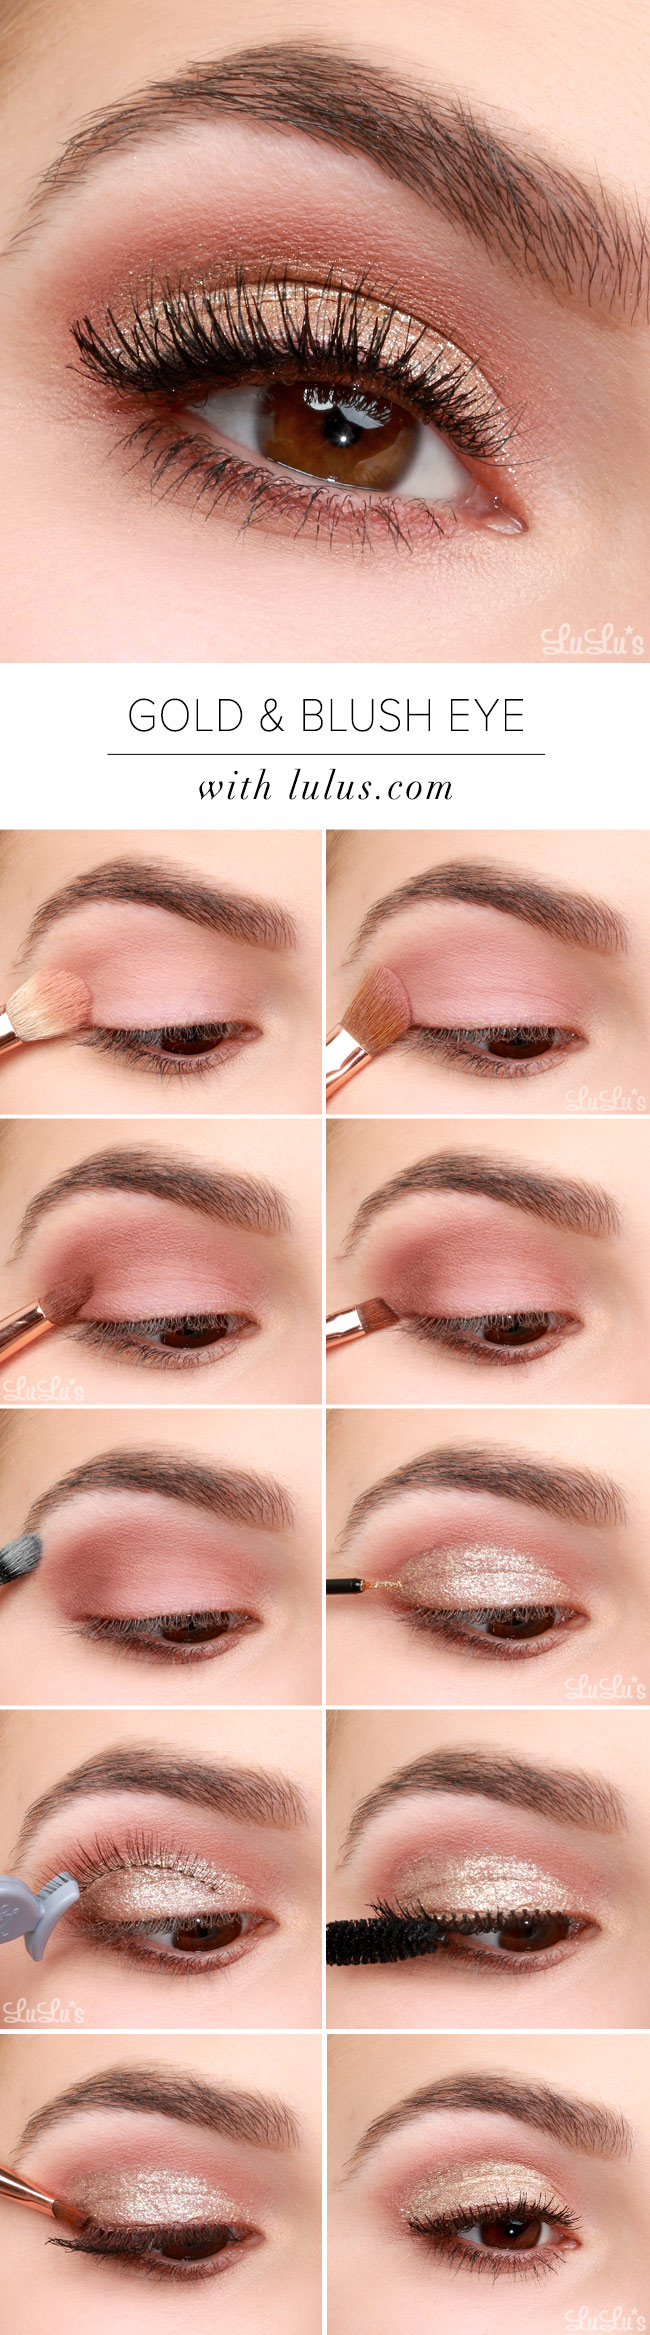 12 Party Perfect Makeup Tutorials You Will Love To Copy